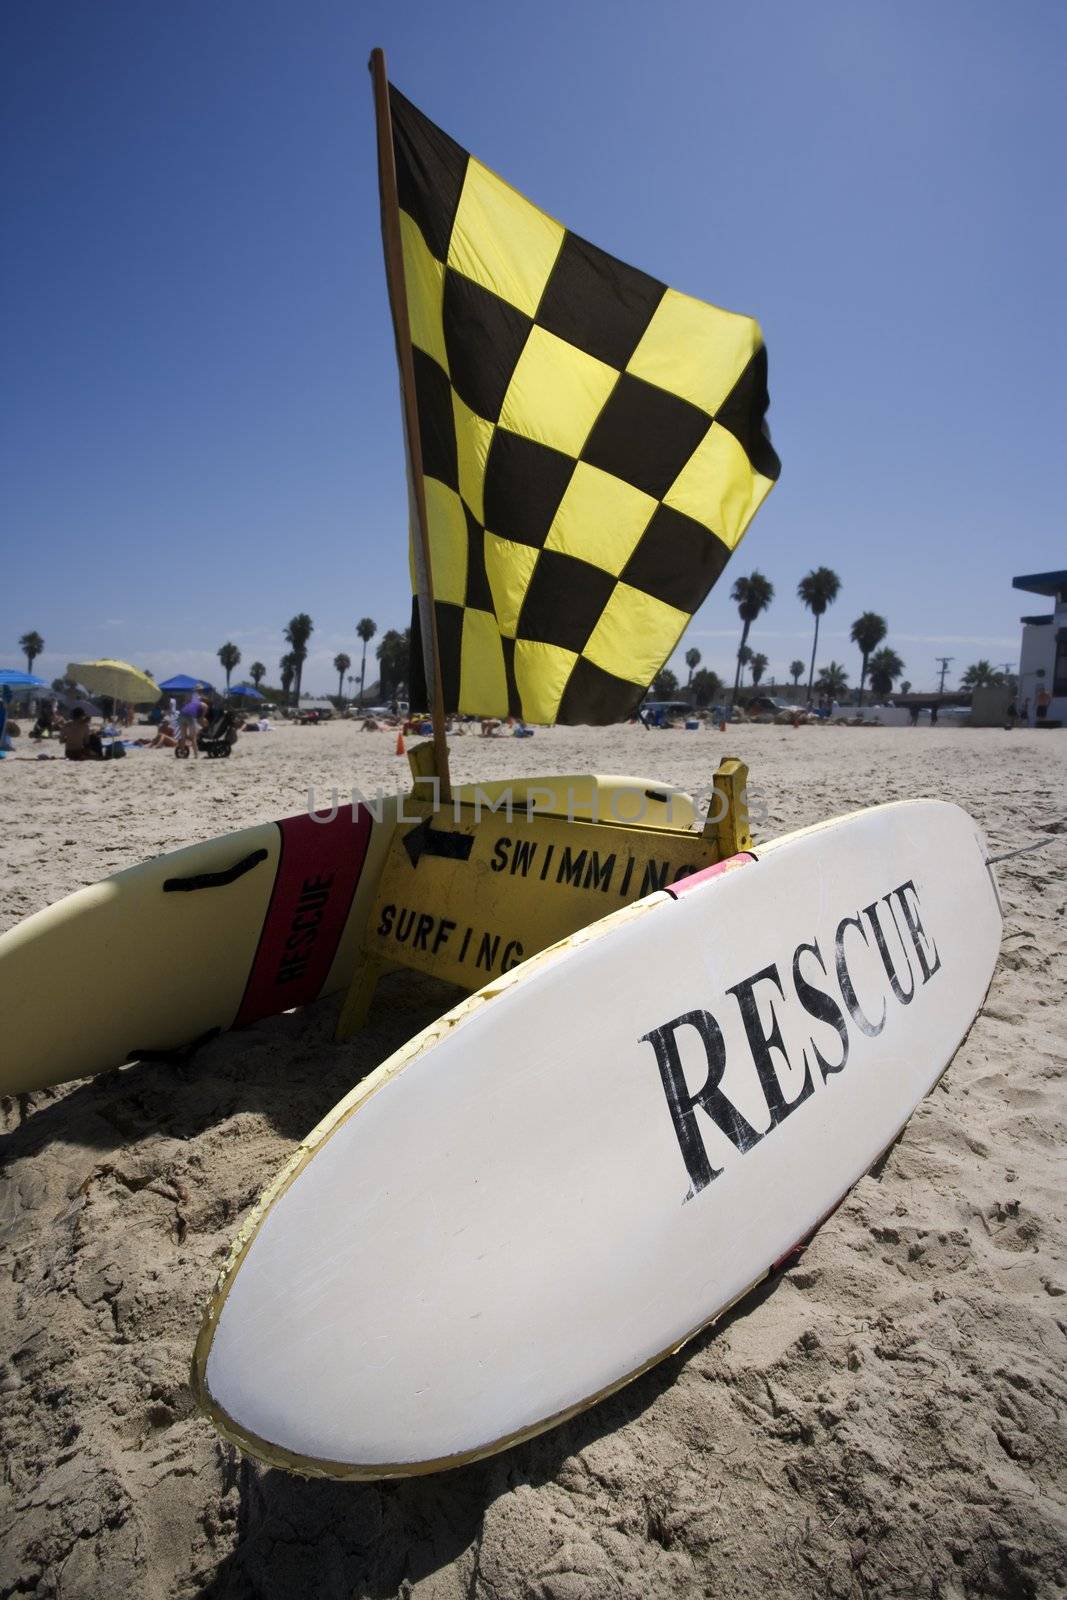 Rescue surfboard and warning flag on beach